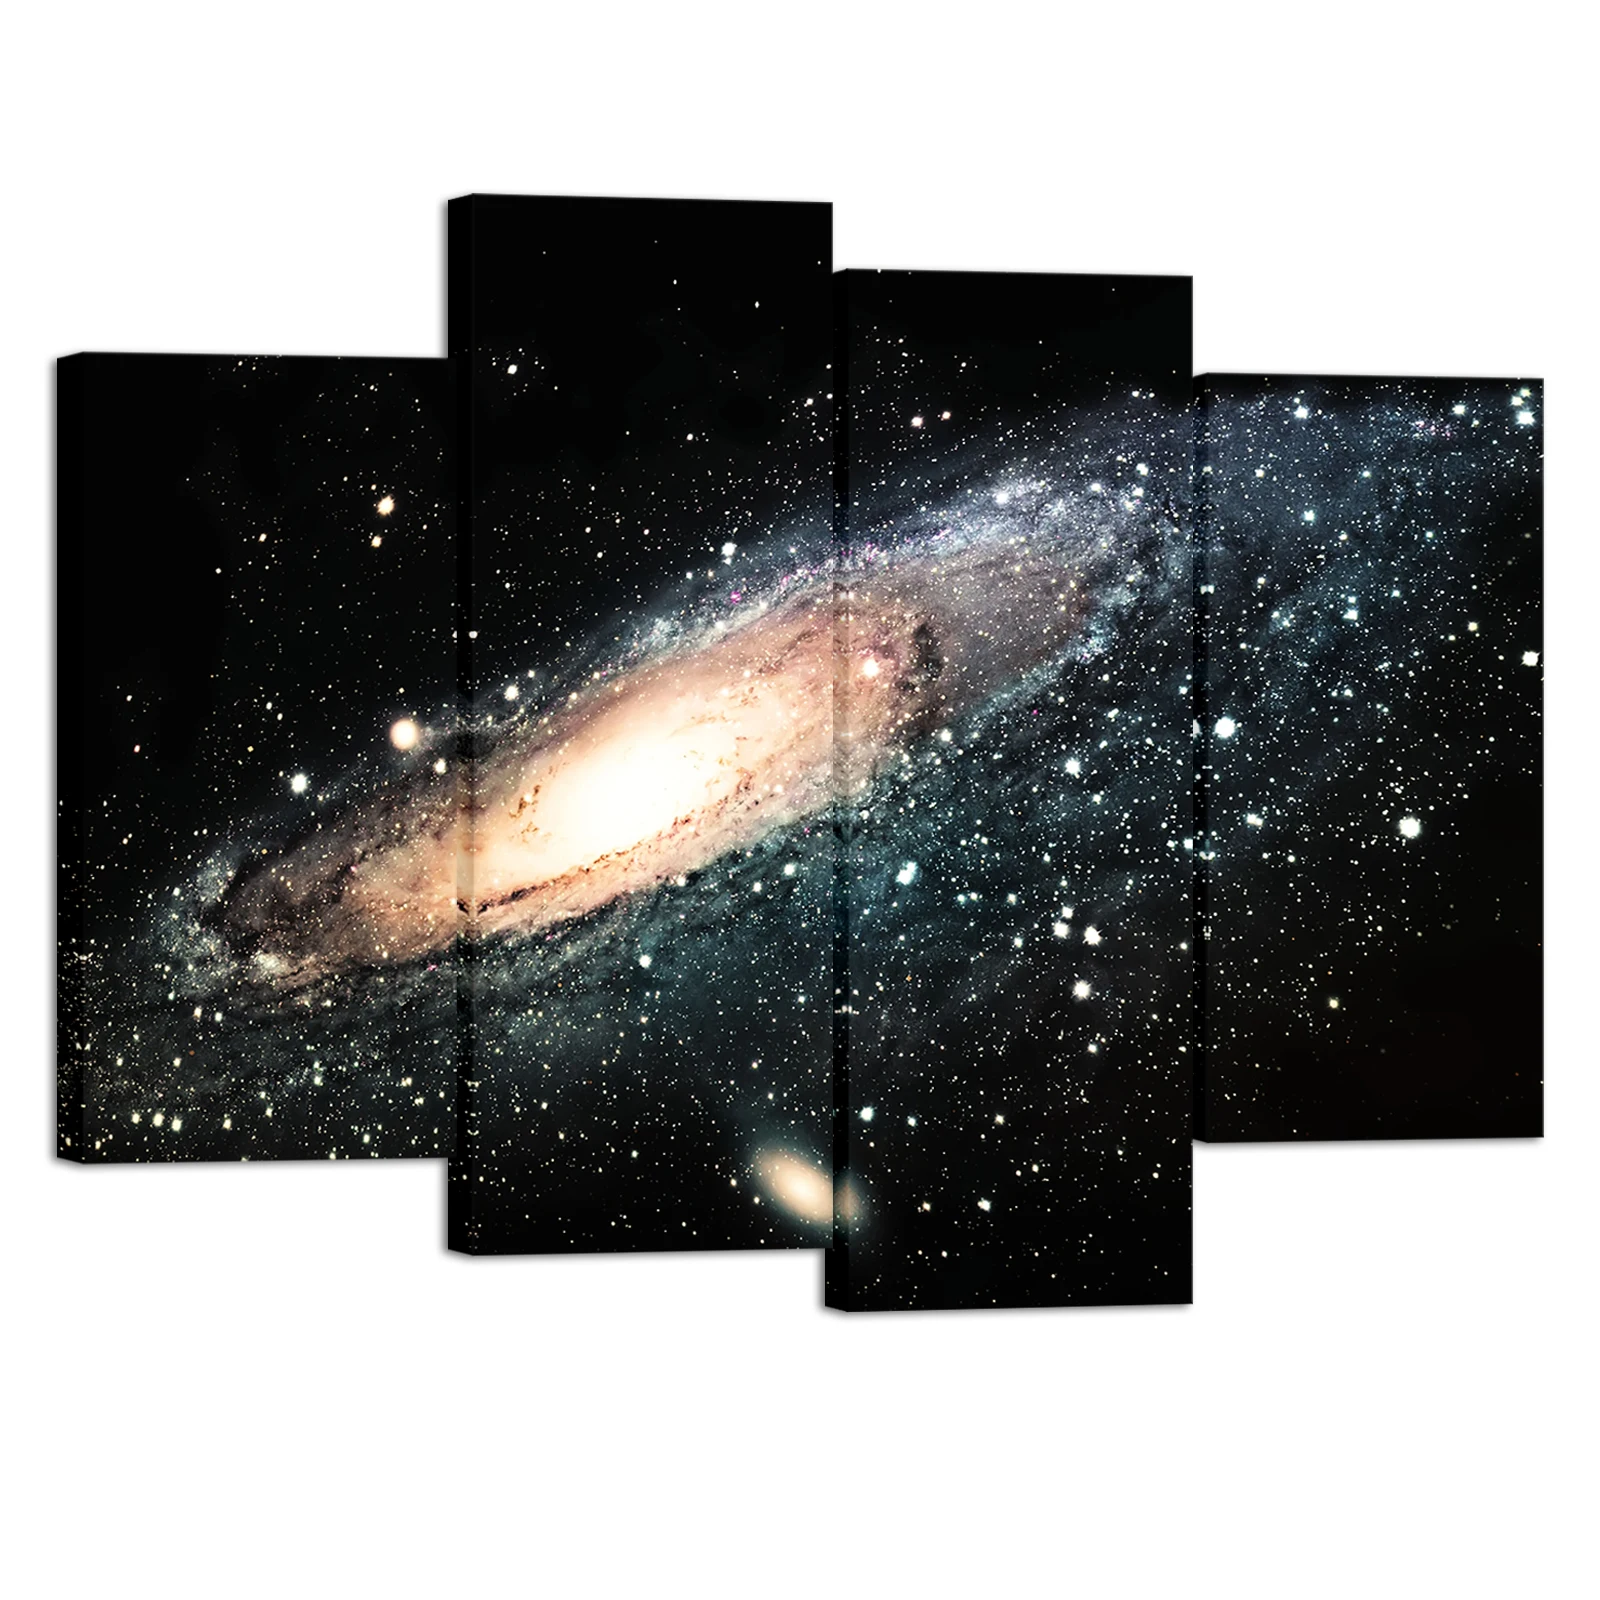 

4 Pieces Poster Wall Art Cosmic Nebula Print Canvas Painting Beautiful Galaxy Modern Style Pictures Living Room Wall Decor